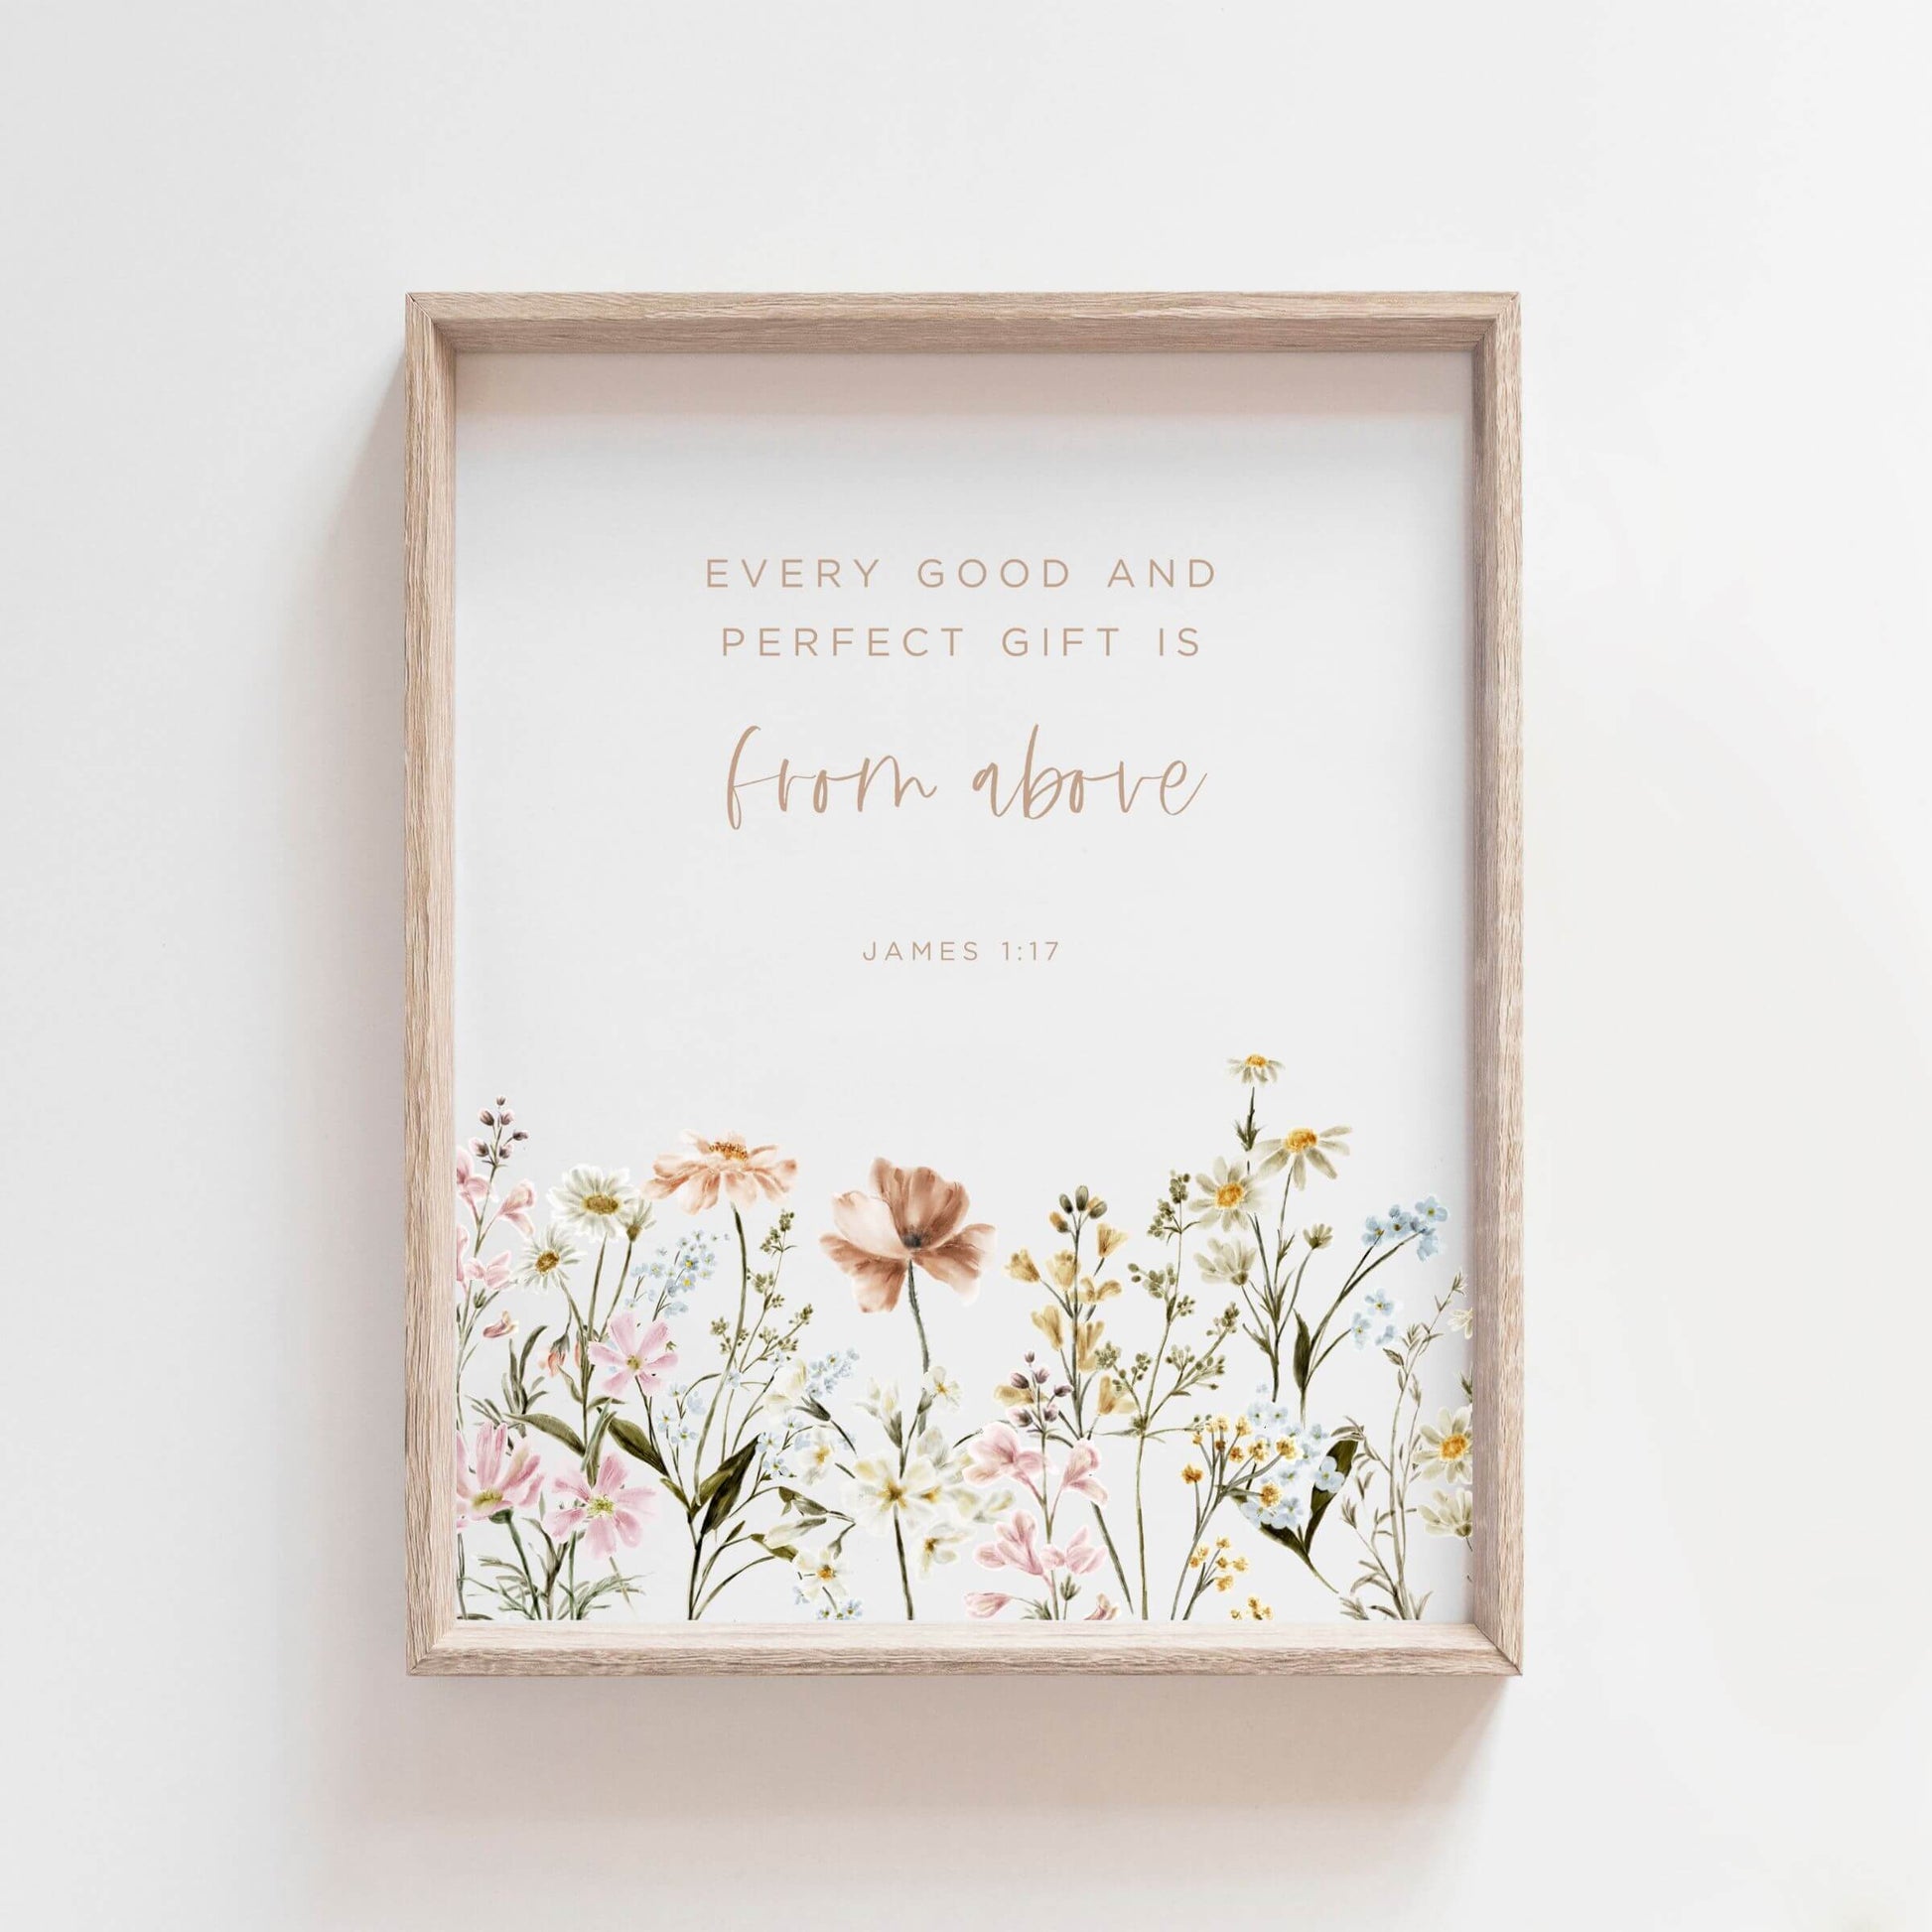 James 1:17 bible verse with modern hand written font and wildflowers hanging in a wood frame